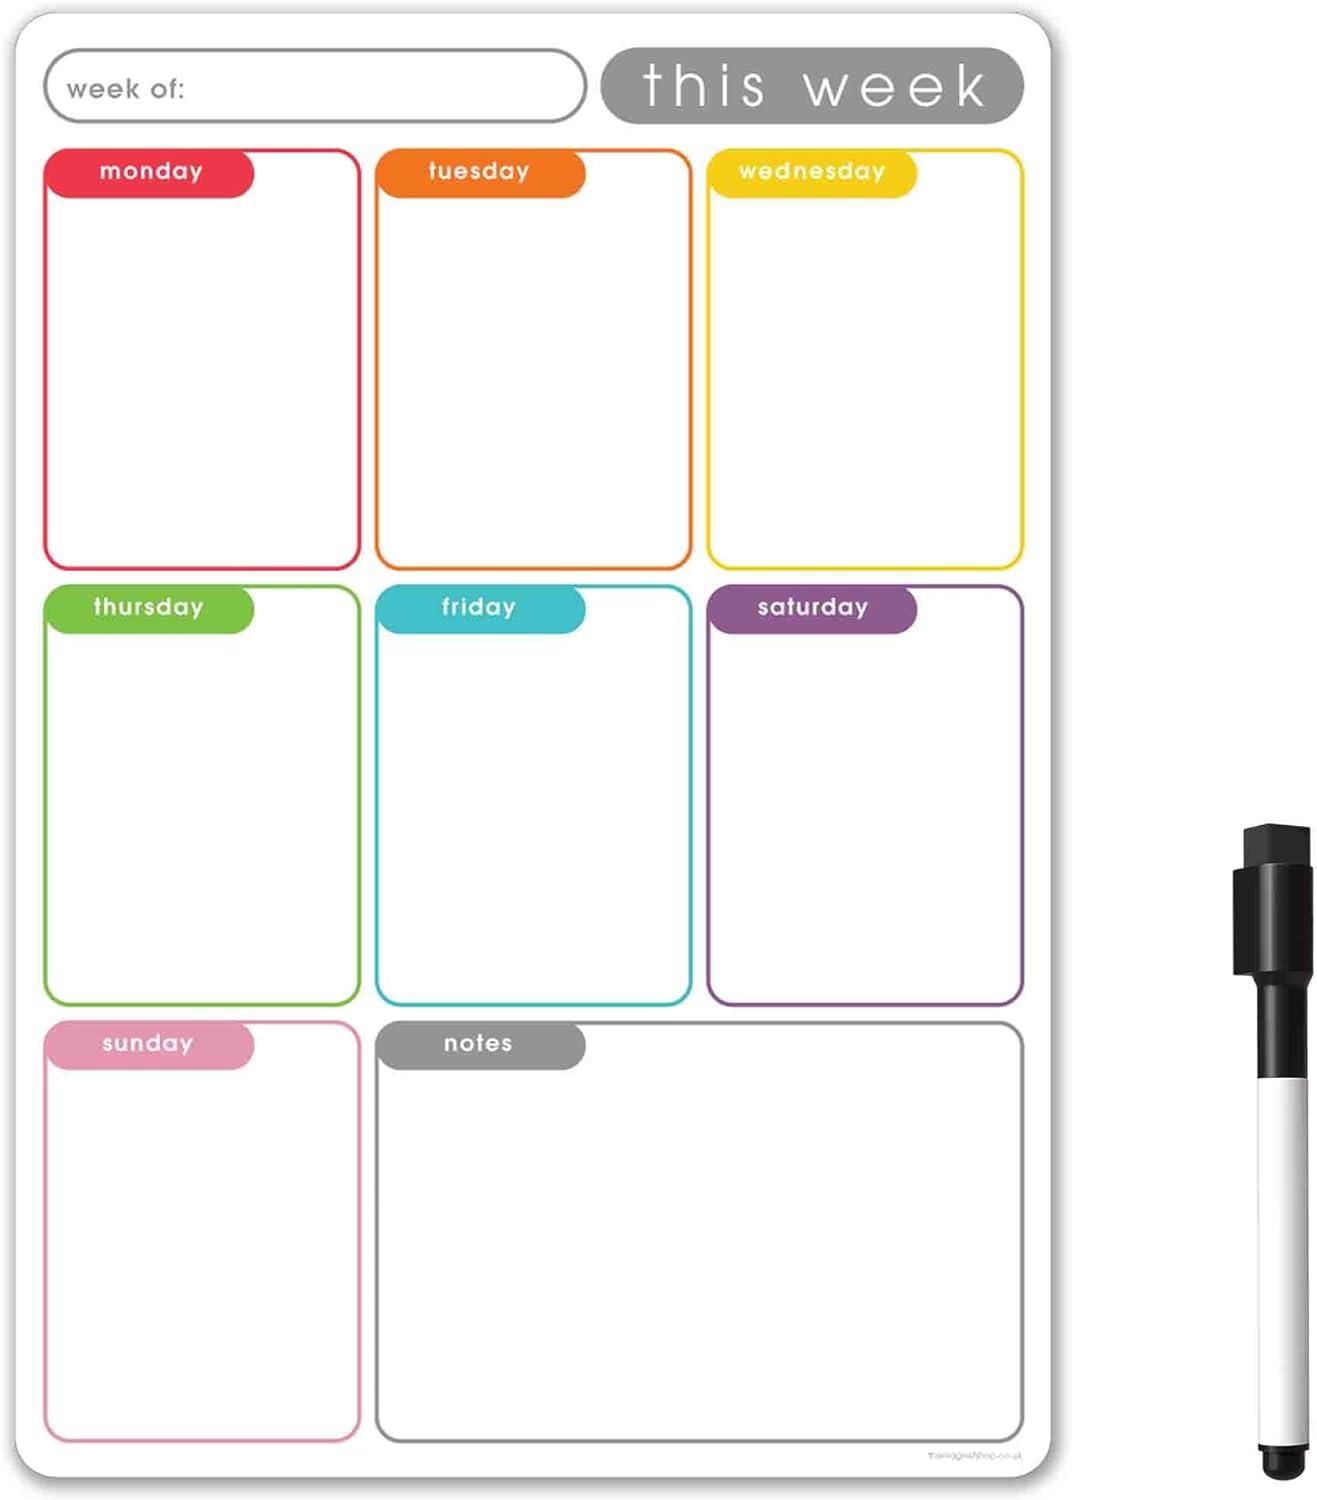 tms a4 magnetic weekly planner dry wipe fridge calendar whiteboard for organising daily tasks  ‎the magnet